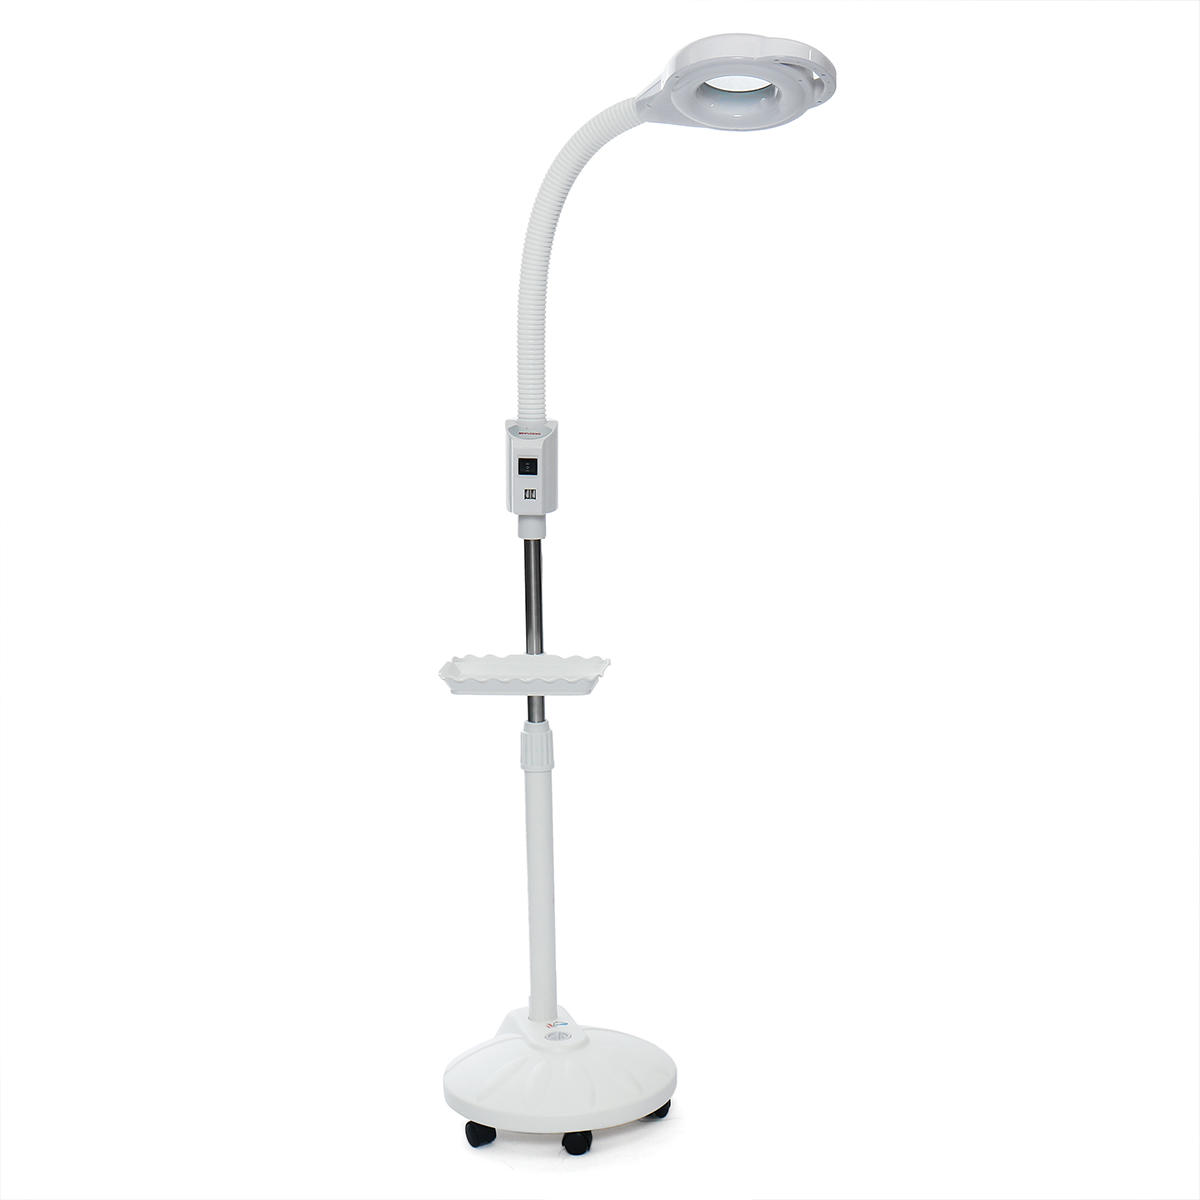 

220v-240V 16X Diopter LED Magnifying Beauty Light Cold/Warm Floor Stand LampWork Light For Beauty Salon Nail